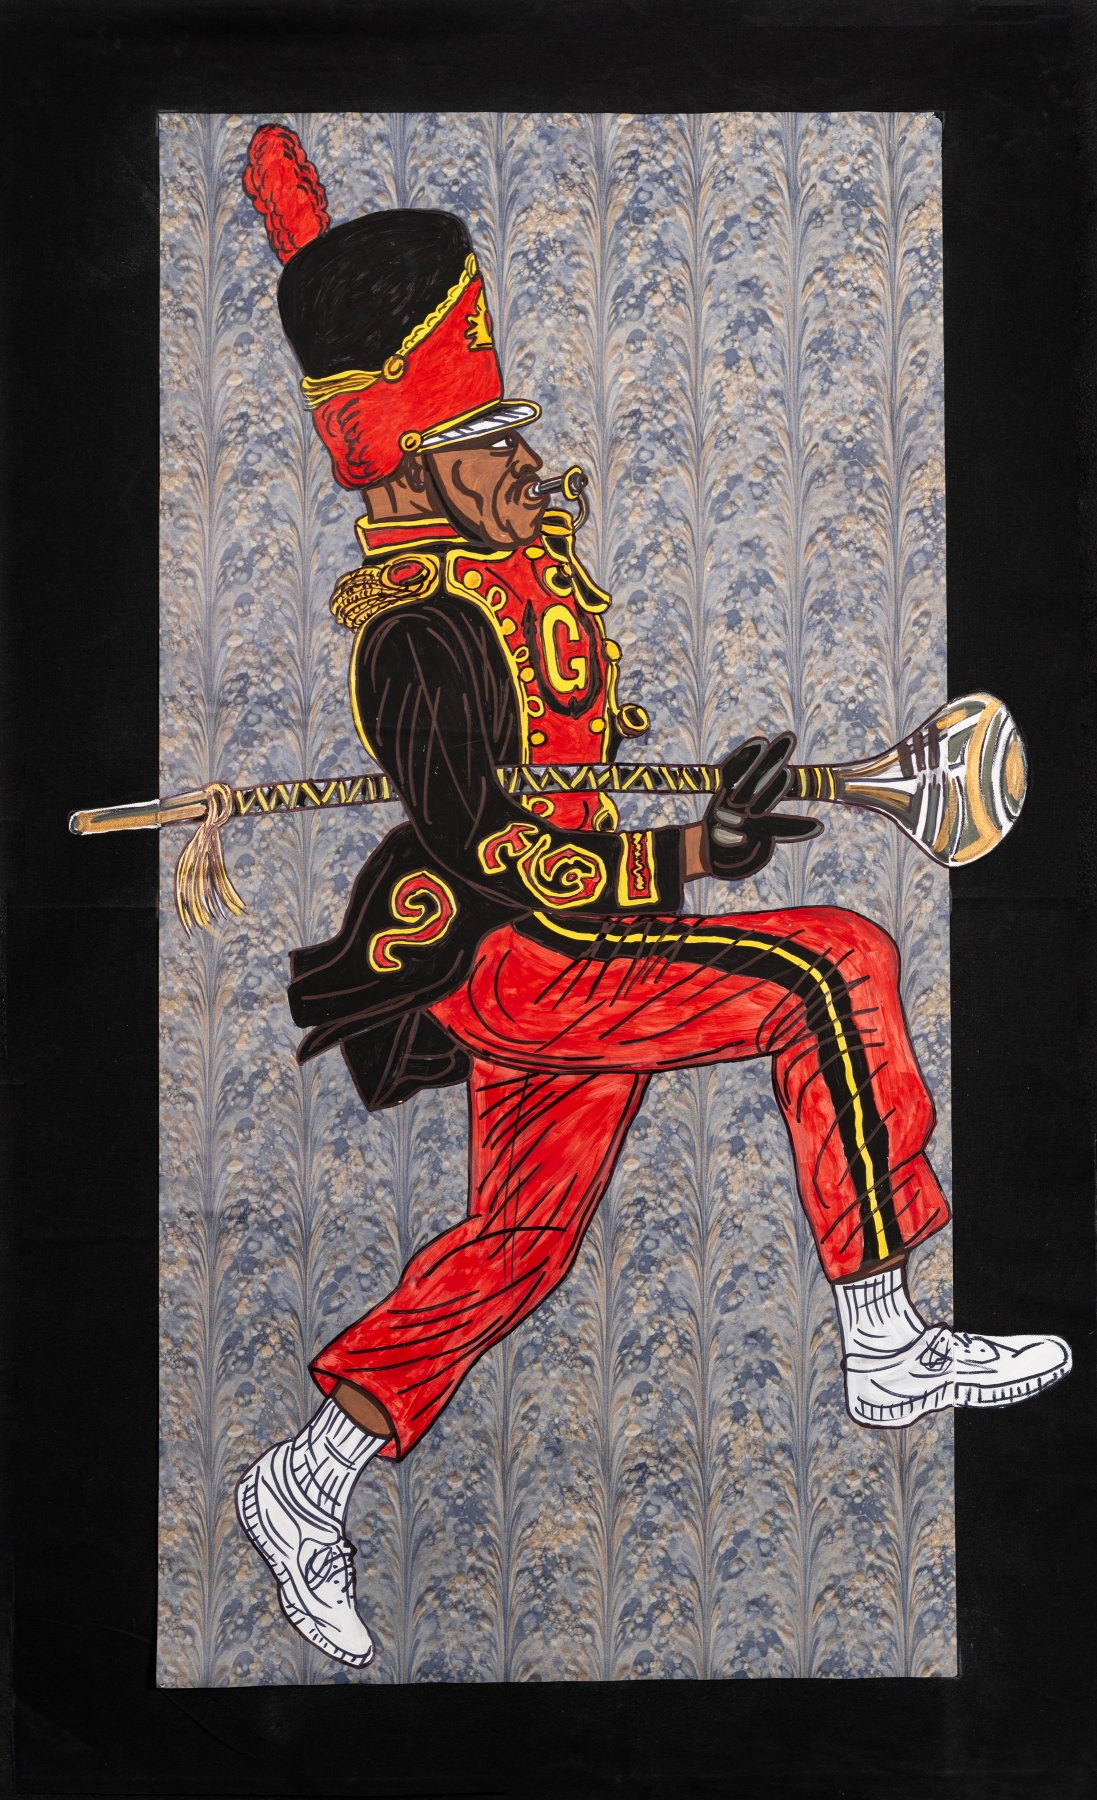 Keith Duncan, Grambling State University Drum Major 3, 2020
61 x 37 inches